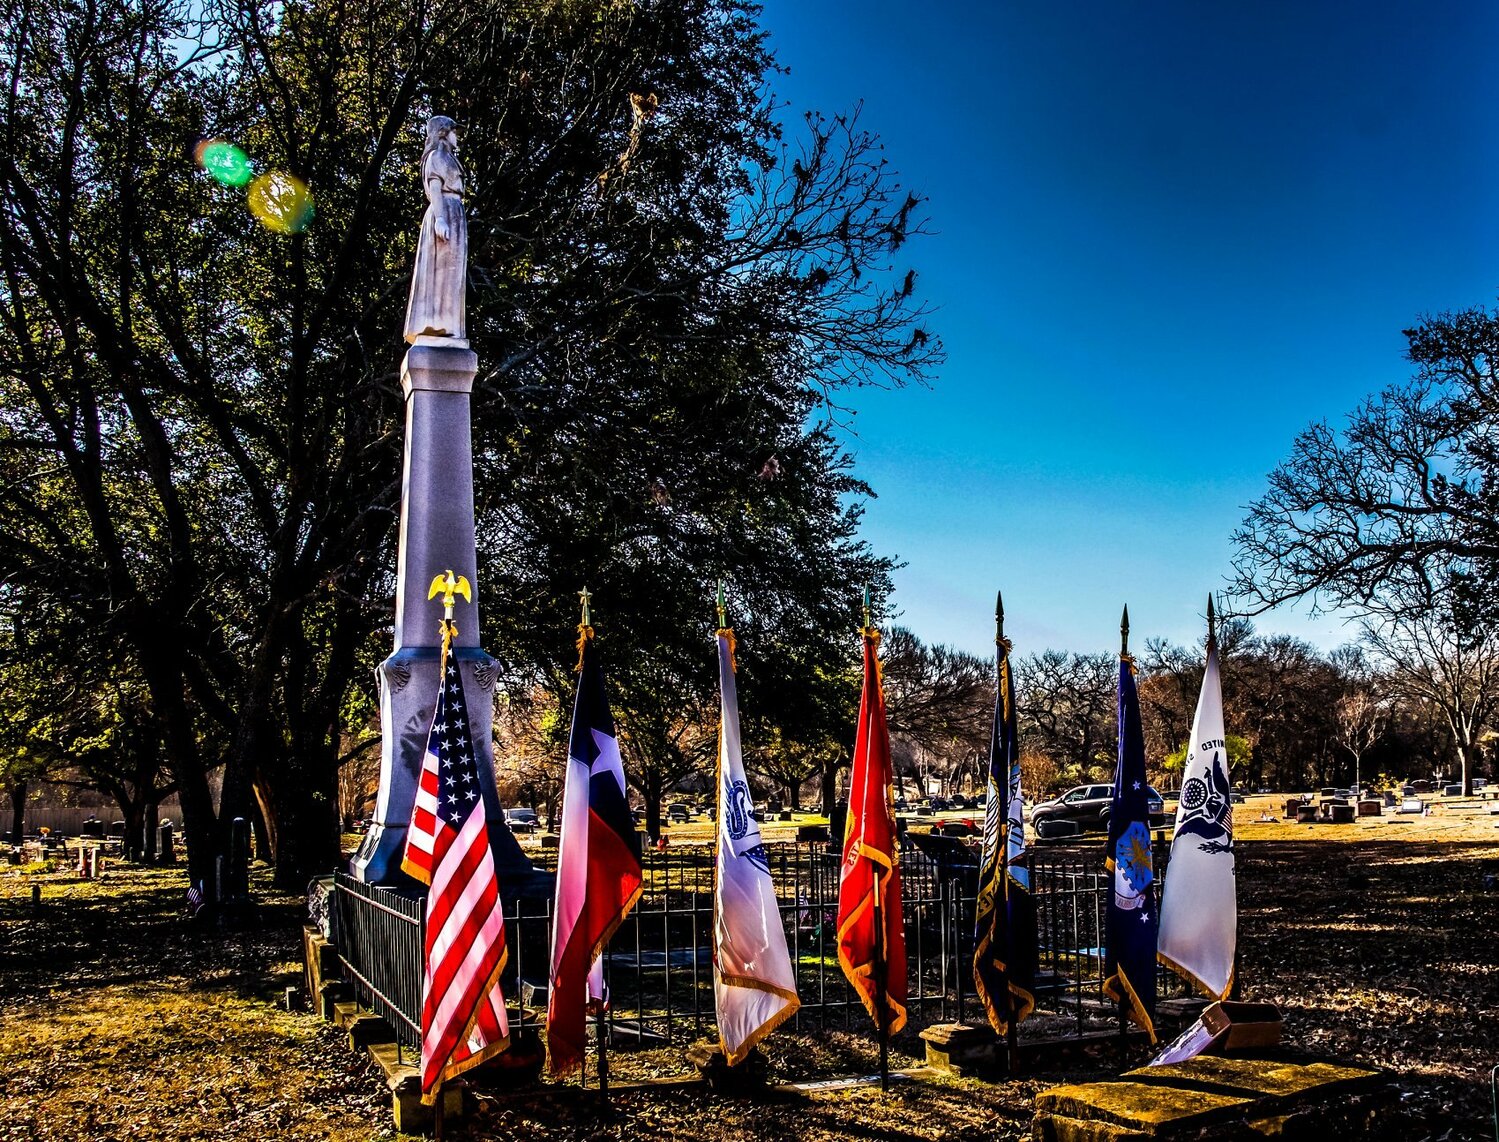 Hosted by the Elizabeth Crockett Chapter of the National Society Daughters of the American Revolution (NSDAR), the remembrance ceremony will allow those in attendance to place wreaths at the graves of the 495 veterans — representing all branches of the military — who are buried at the historic cemetery founded in the early 1800s.